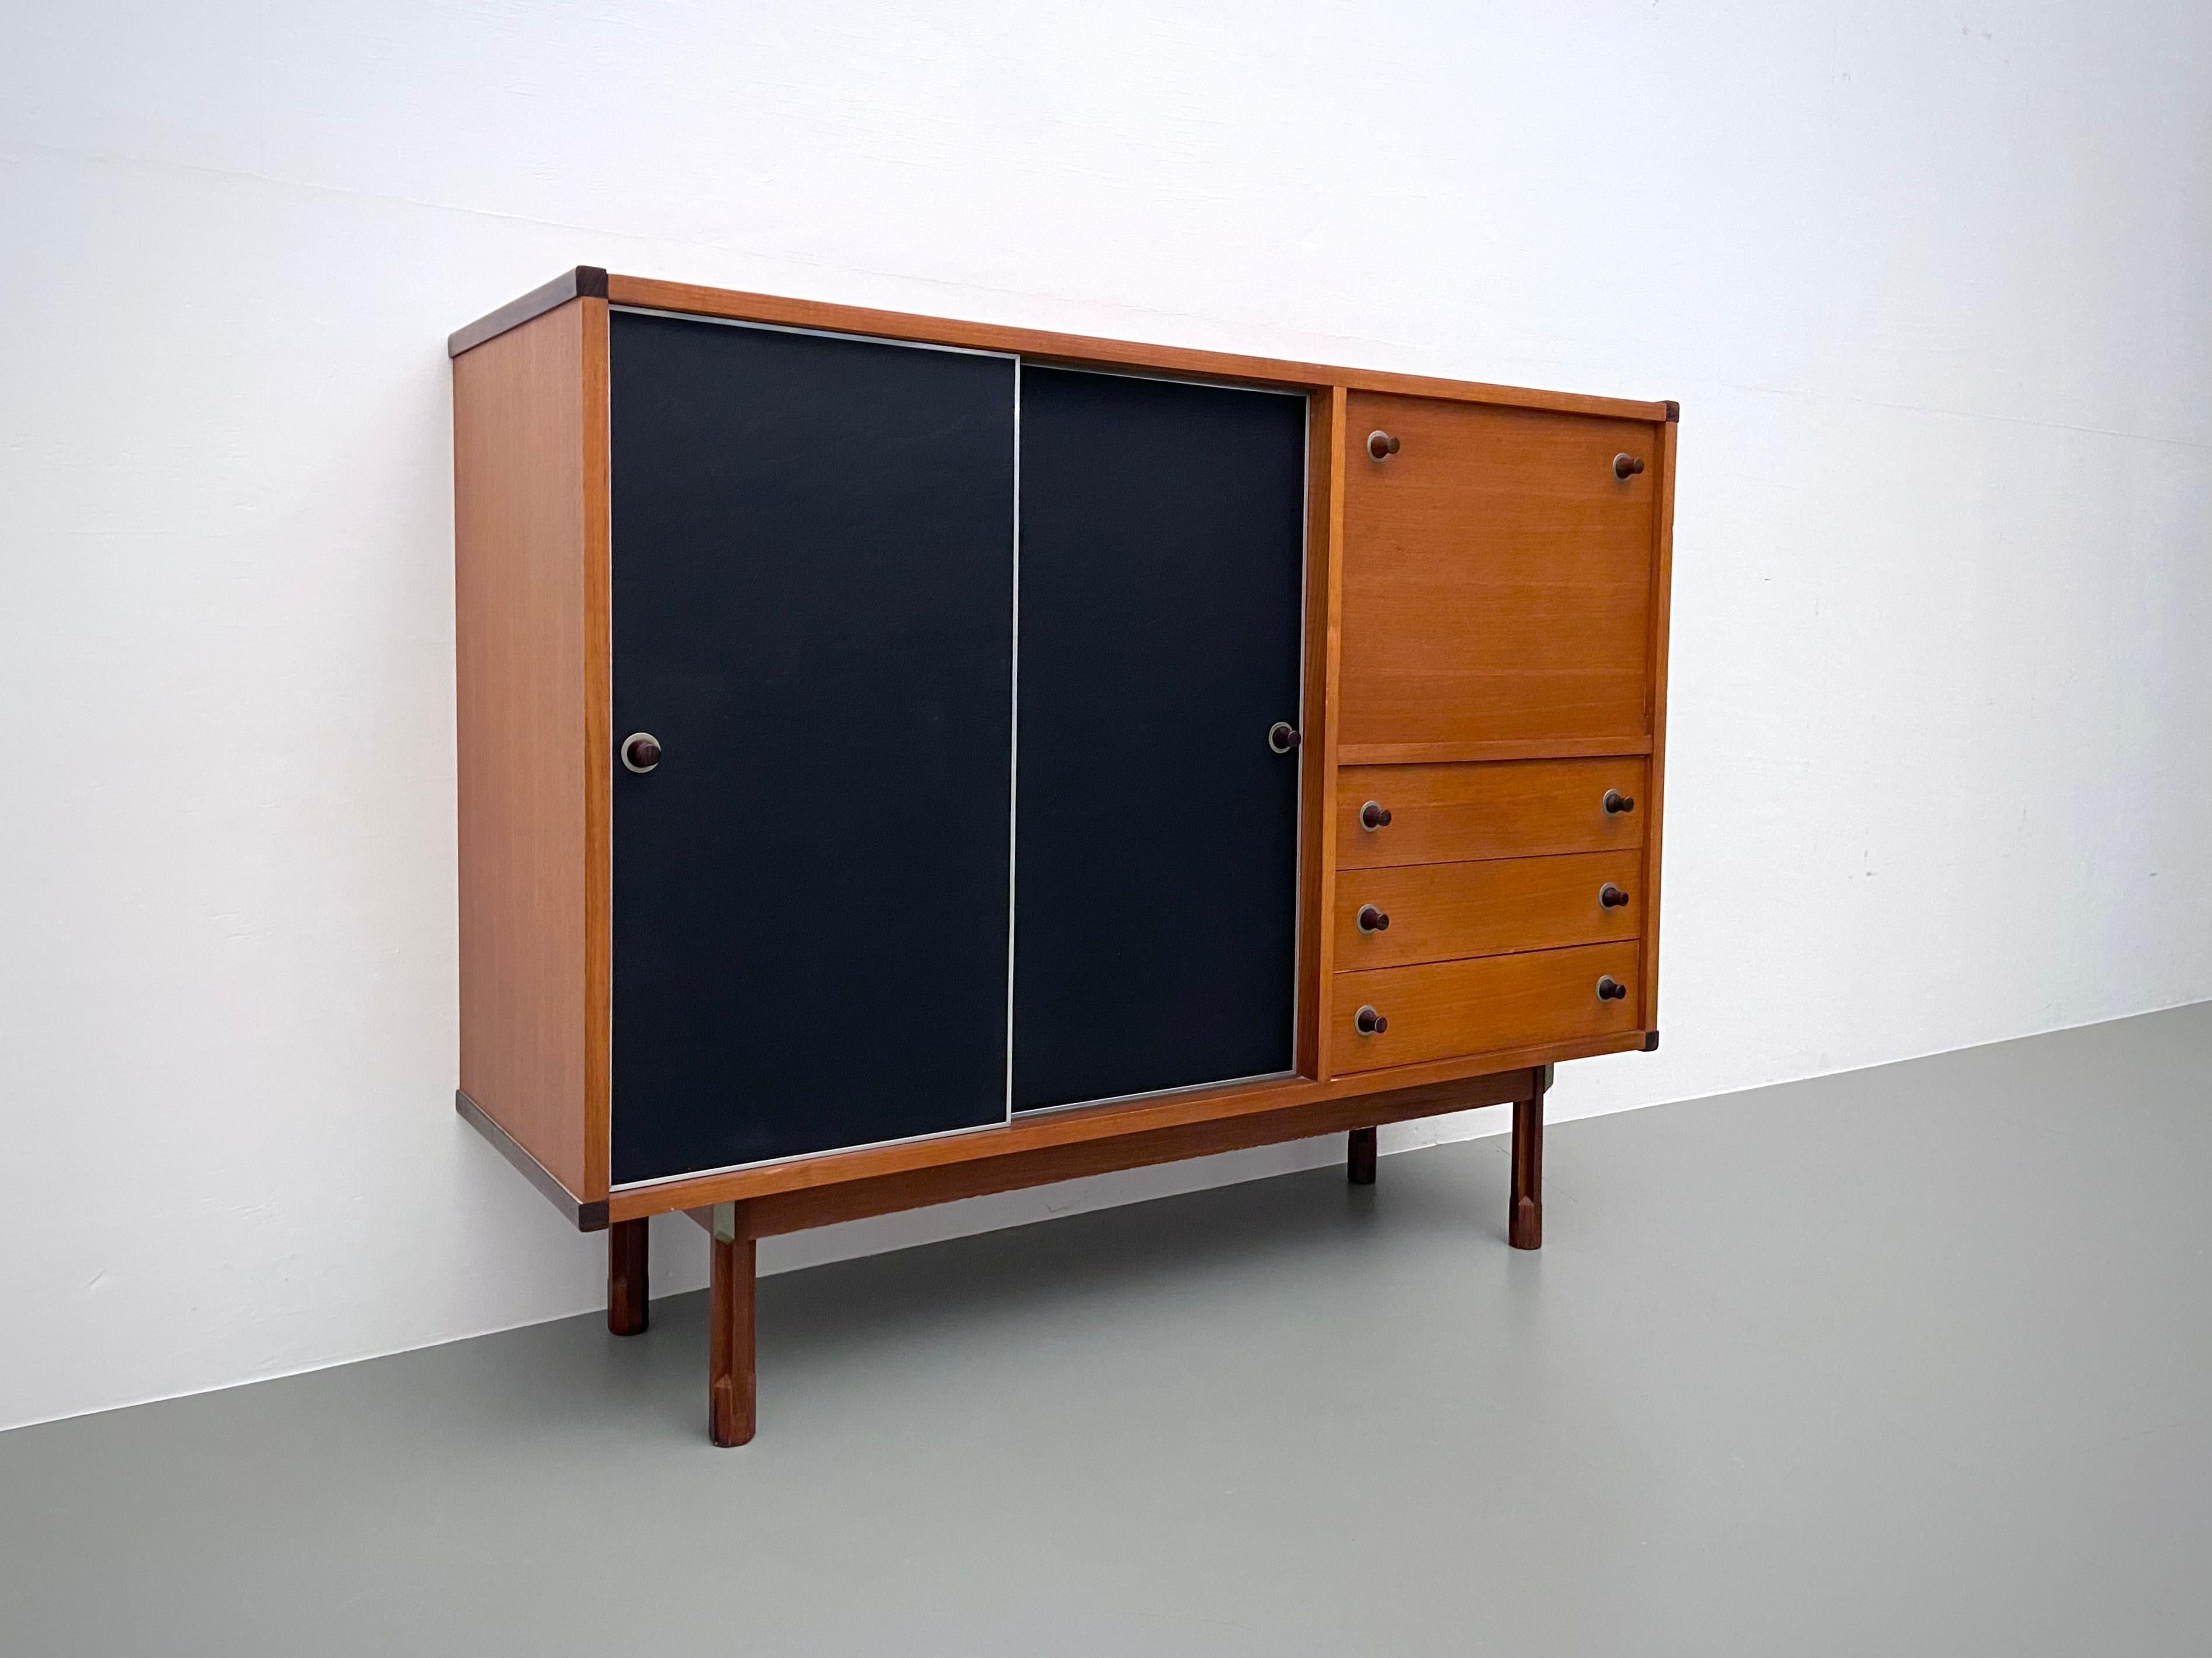 Italian High Credenza by Pierro Ranzani for Elam in Laminate, Teak and Metal, 1962 For Sale